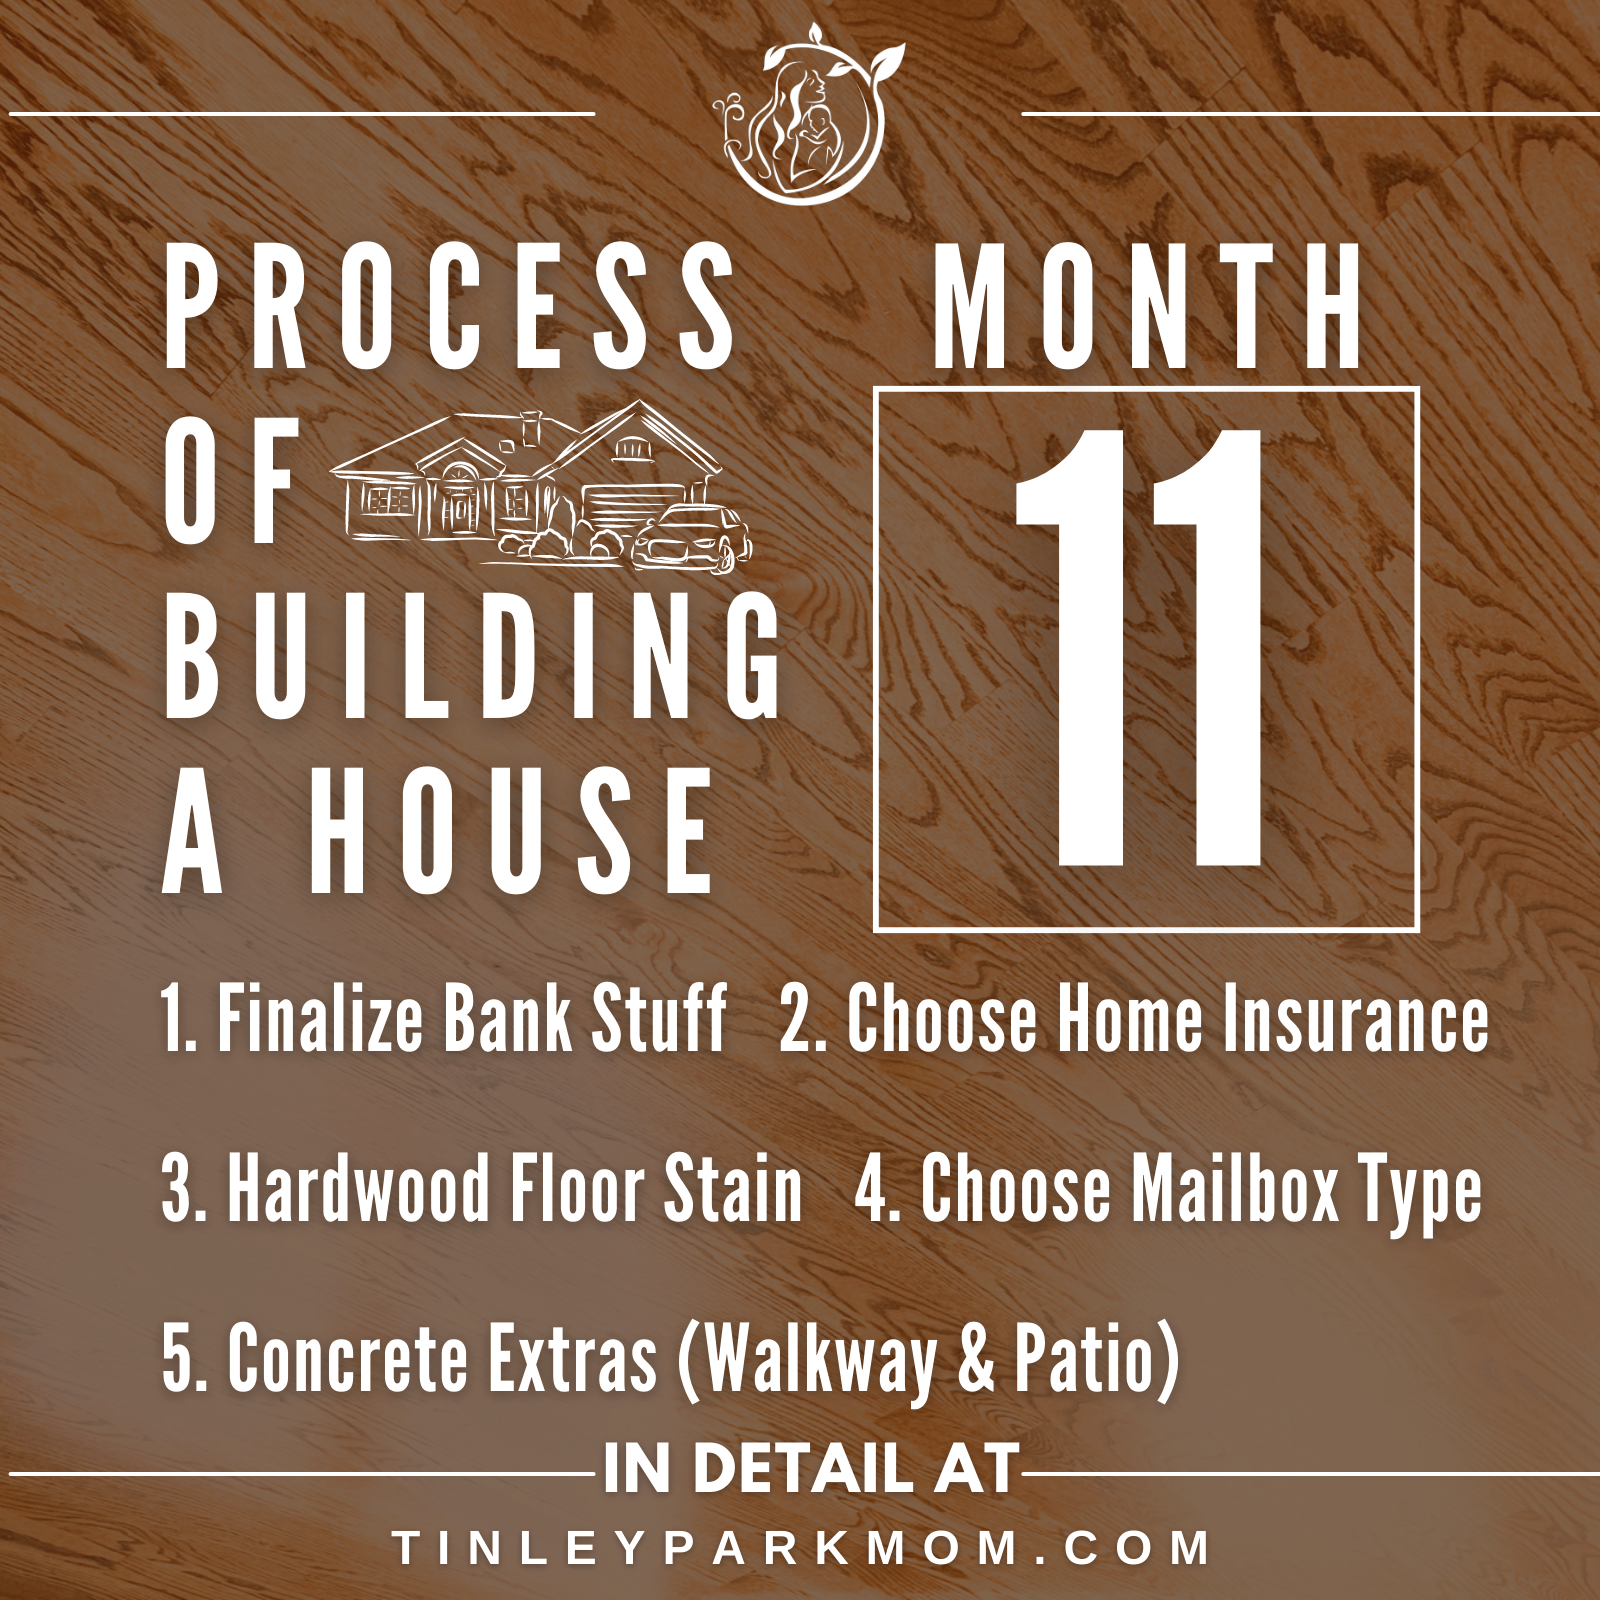 PROCESS OF BUILDING A HOUSE 1. Finalize Bank Stuff 2. Choose Home Insurance 3. Hardwood Floor Stain 4. Choose Mailbox Type
5. Concrete Extras (Walkway & Patio)